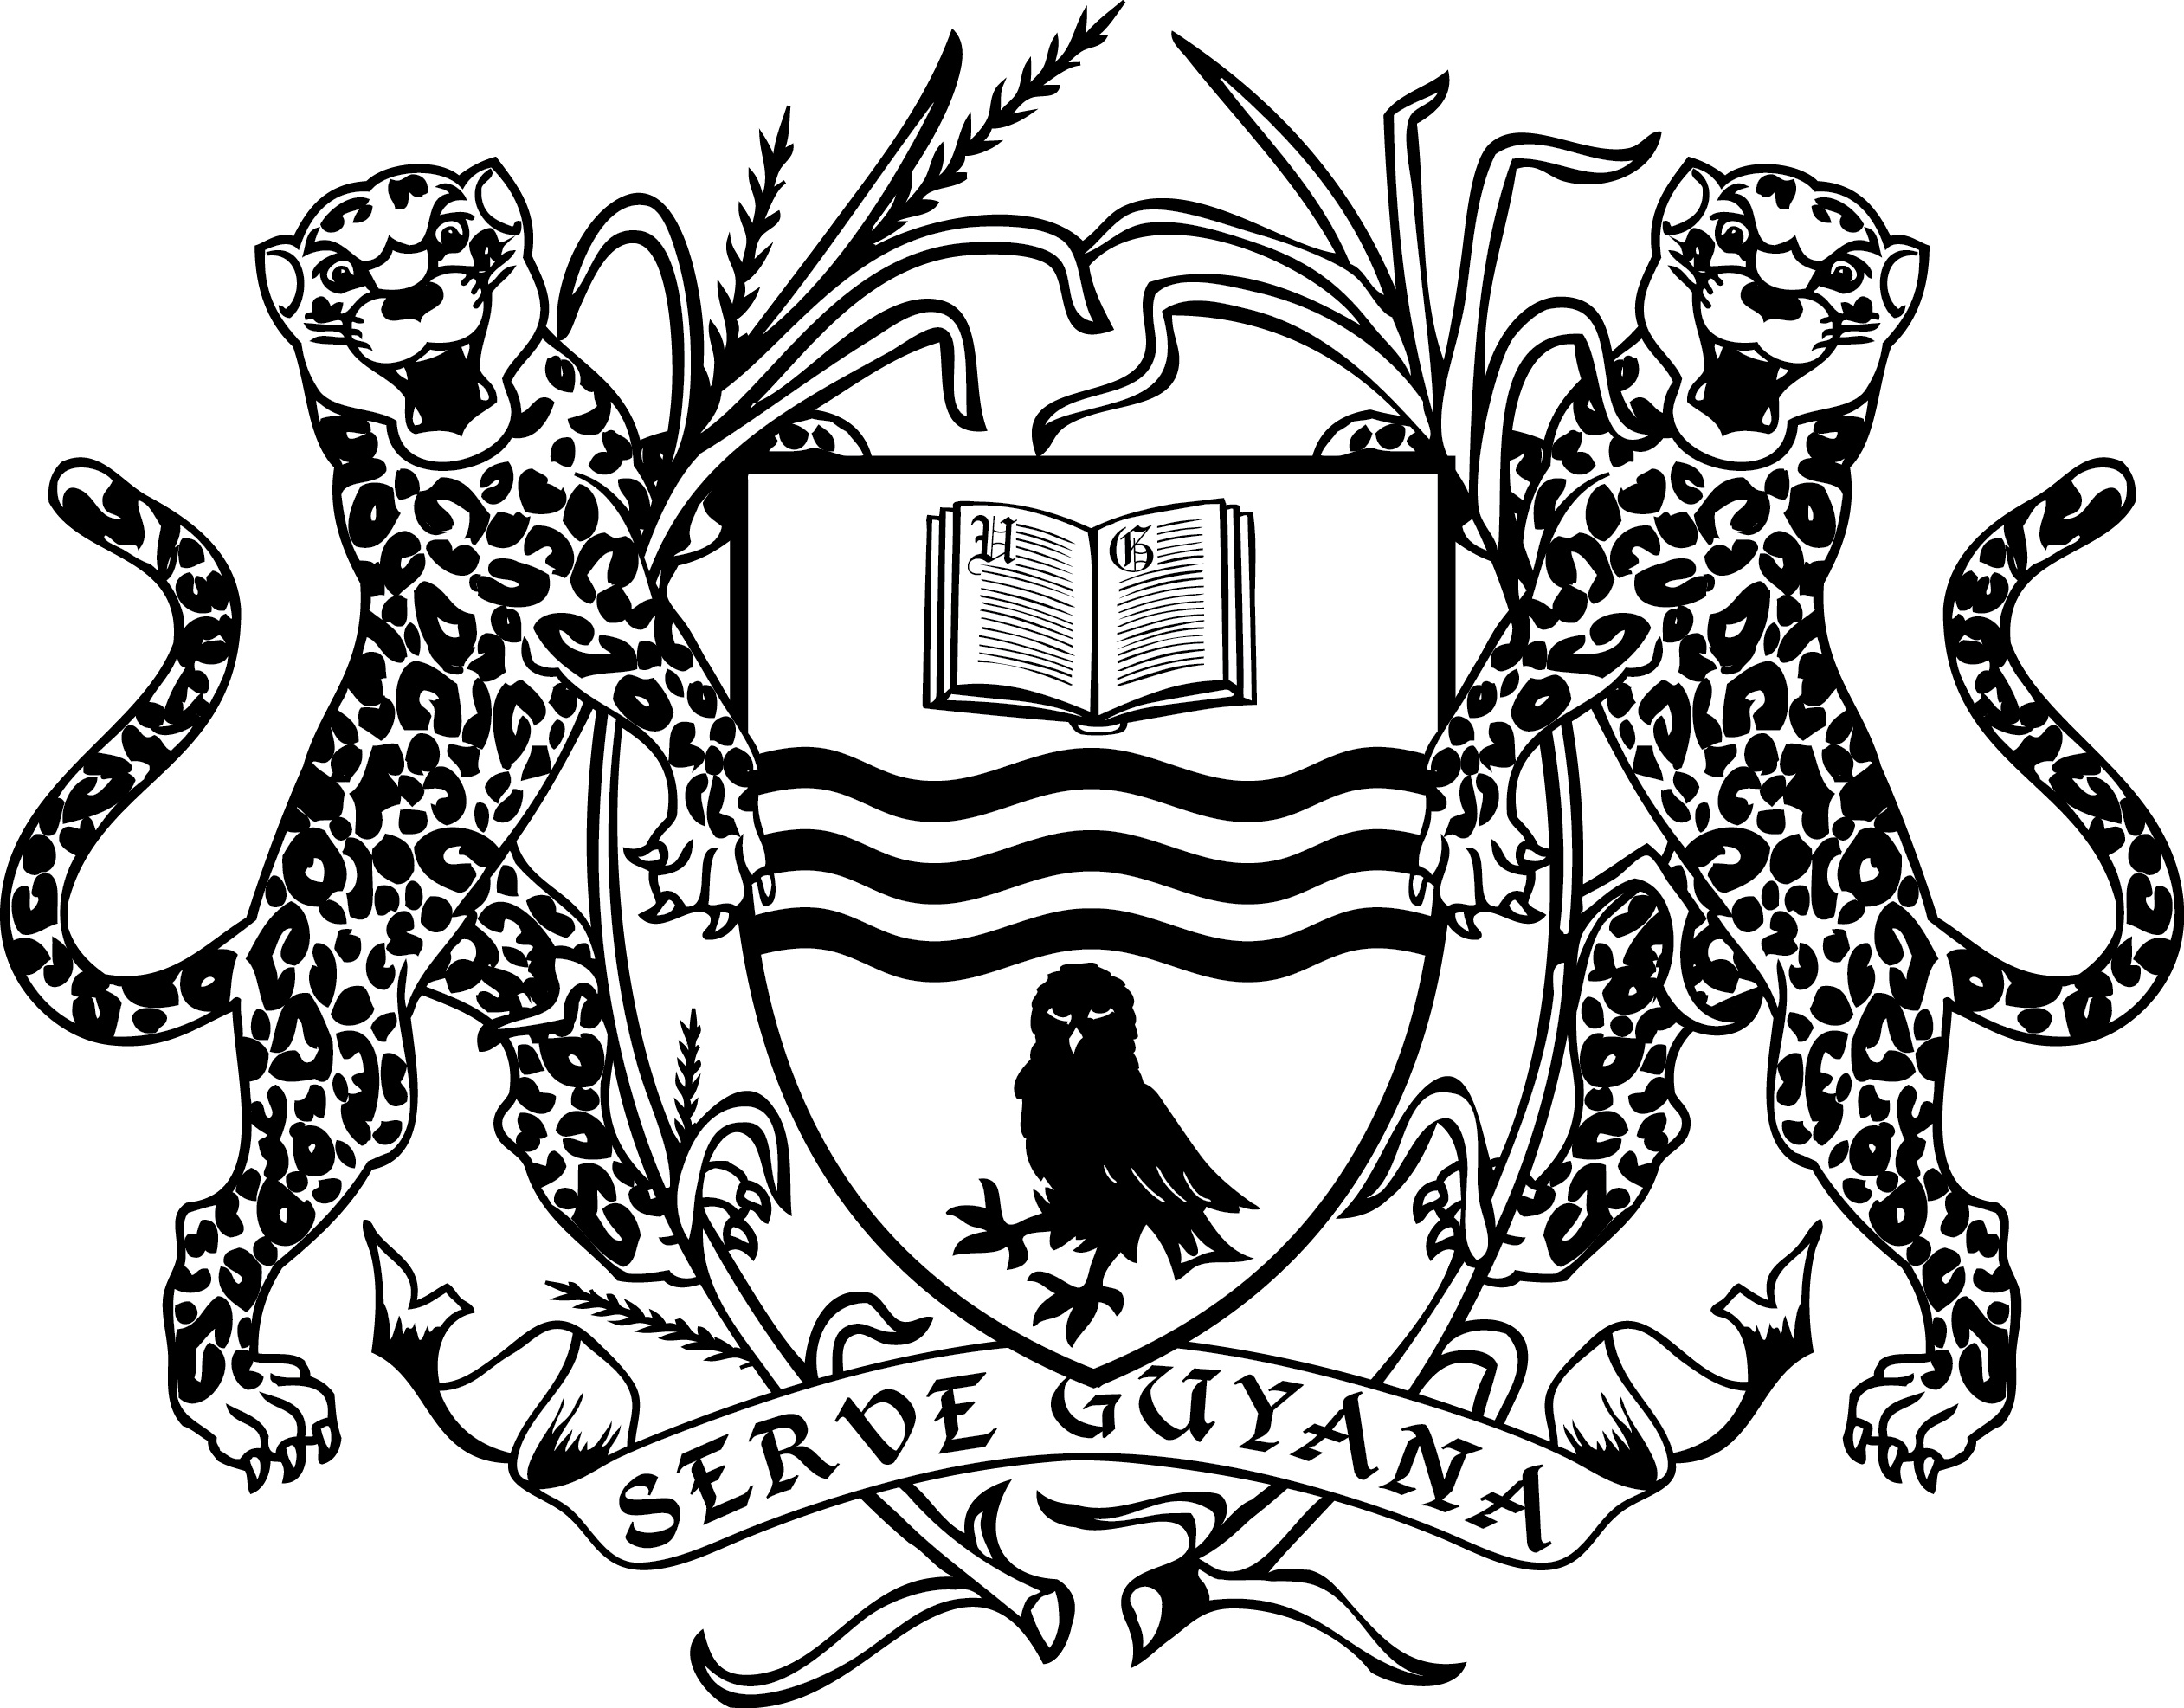 A Black And White Logo With Cheetahs And A Bird